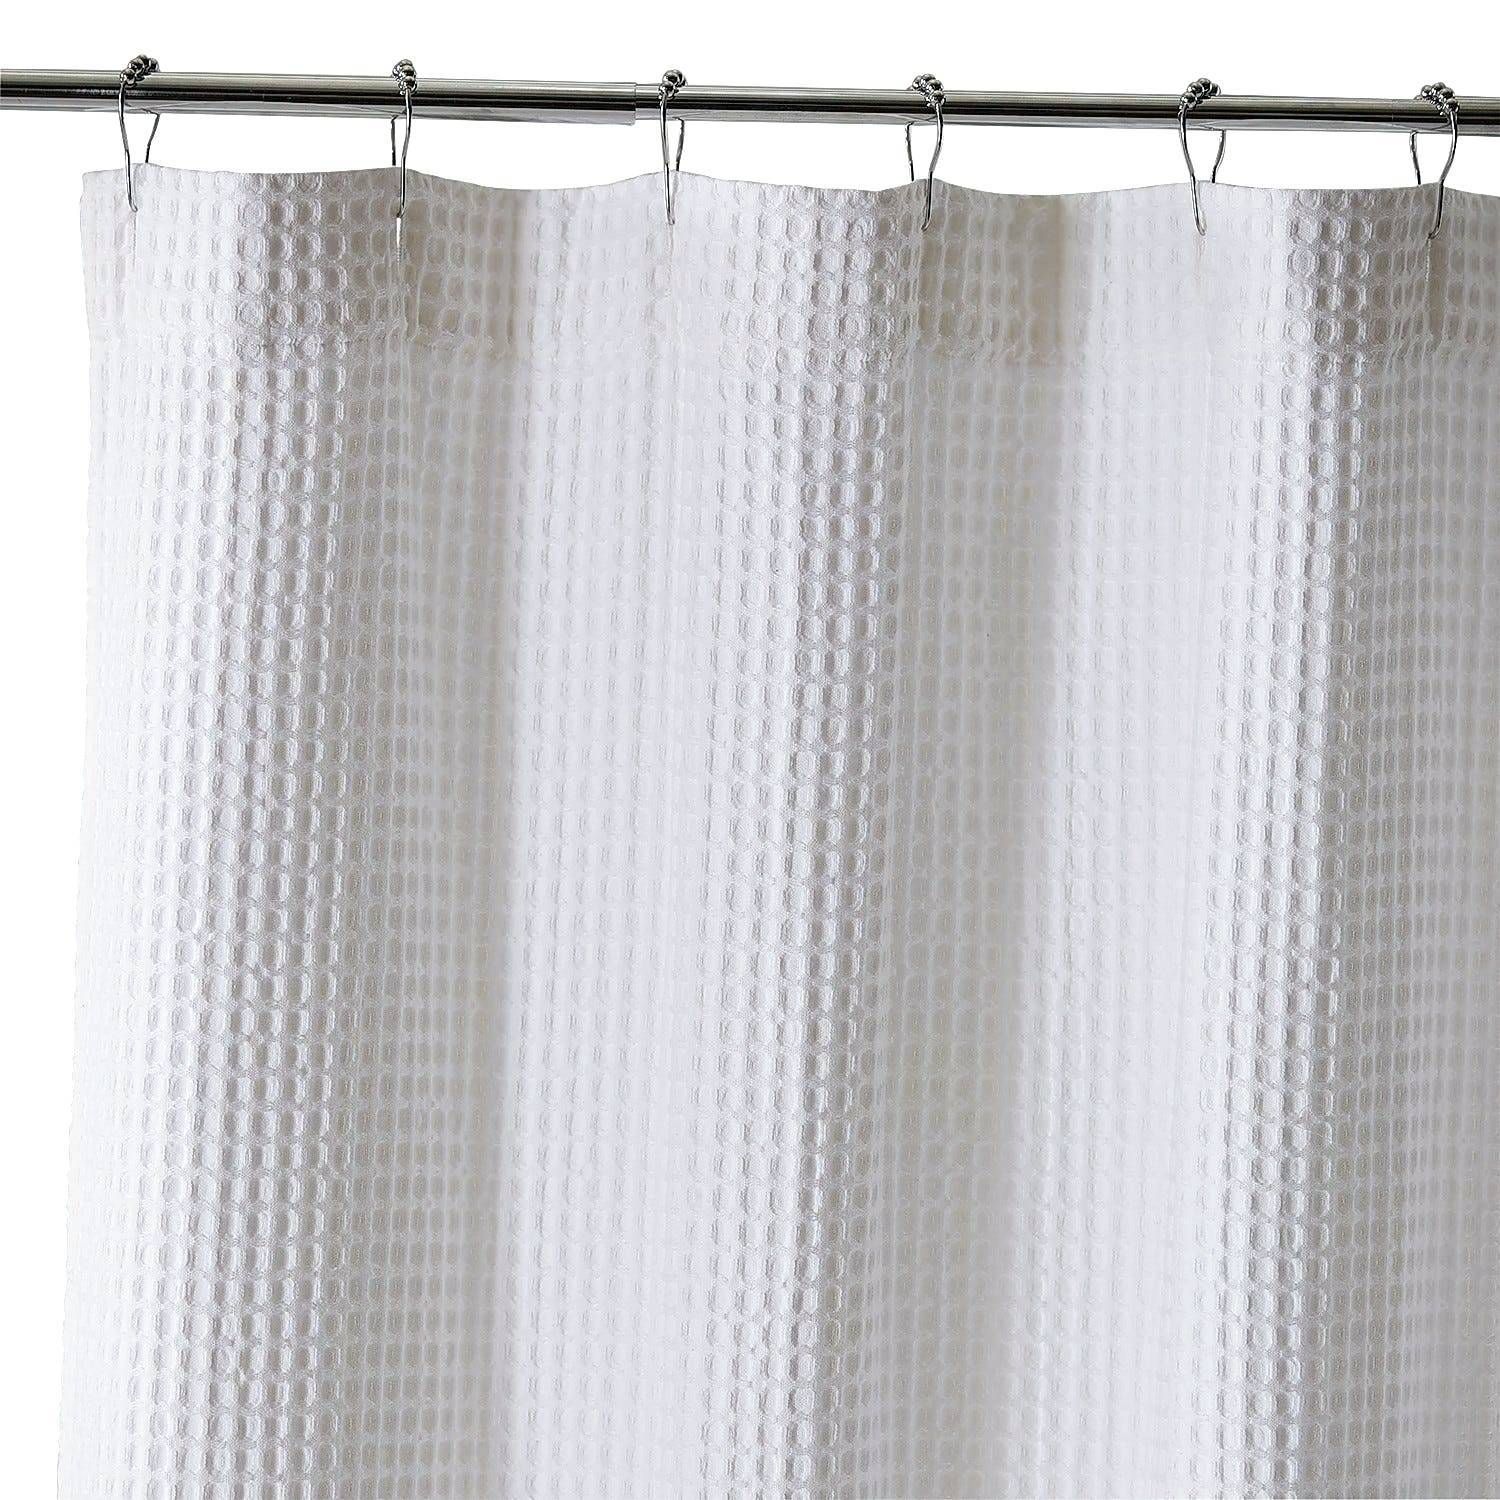 Wonderful White Cotton Ruffle Shower Curtain Bathrooms With Rod Pocket Cotton Solid Color Ruched Ruffle Kitchen Curtains (View 19 of 20)